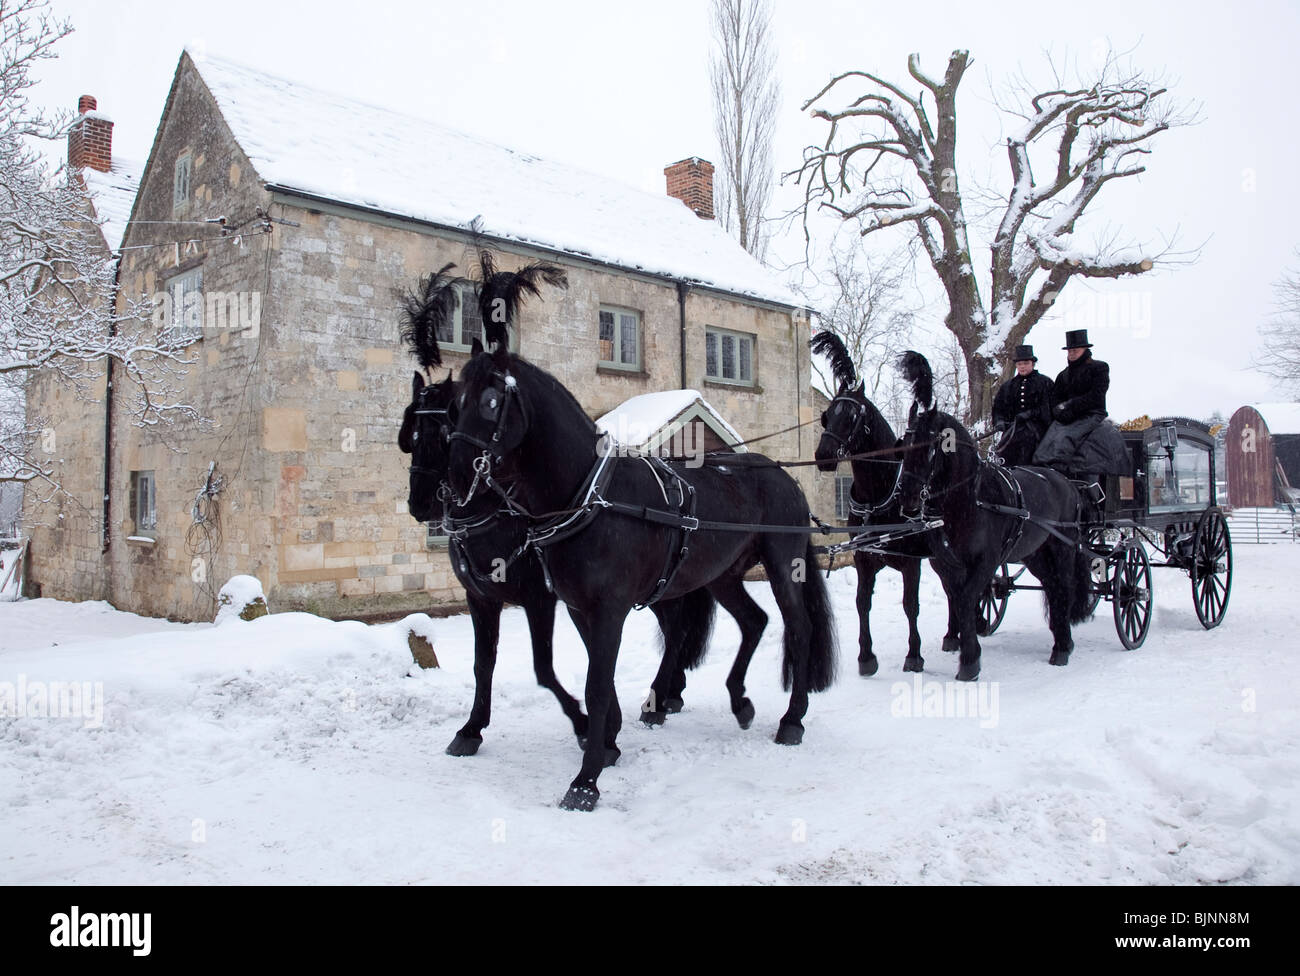 Traditional old fashioned Horse drawn funeral carriage in snow with four horses ready to leave for church service Stock Photo